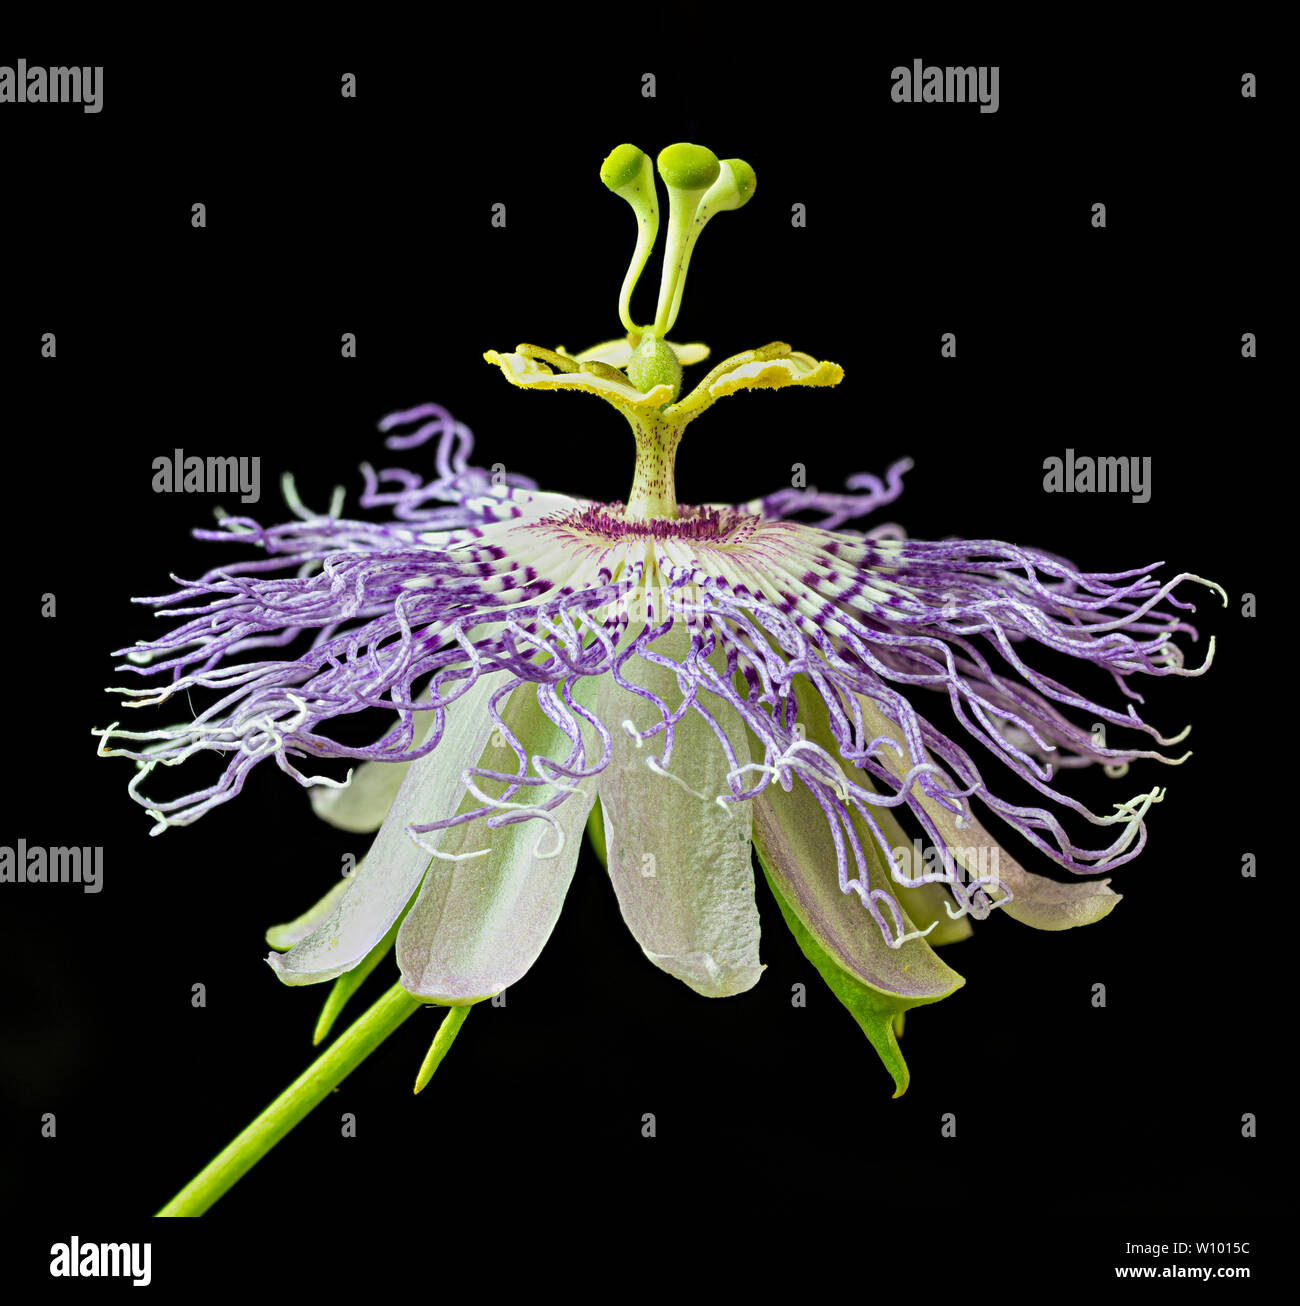 Flower of passion vine (Passiflora incarnate)--the only species of passion flower native to North America. Stock Photo